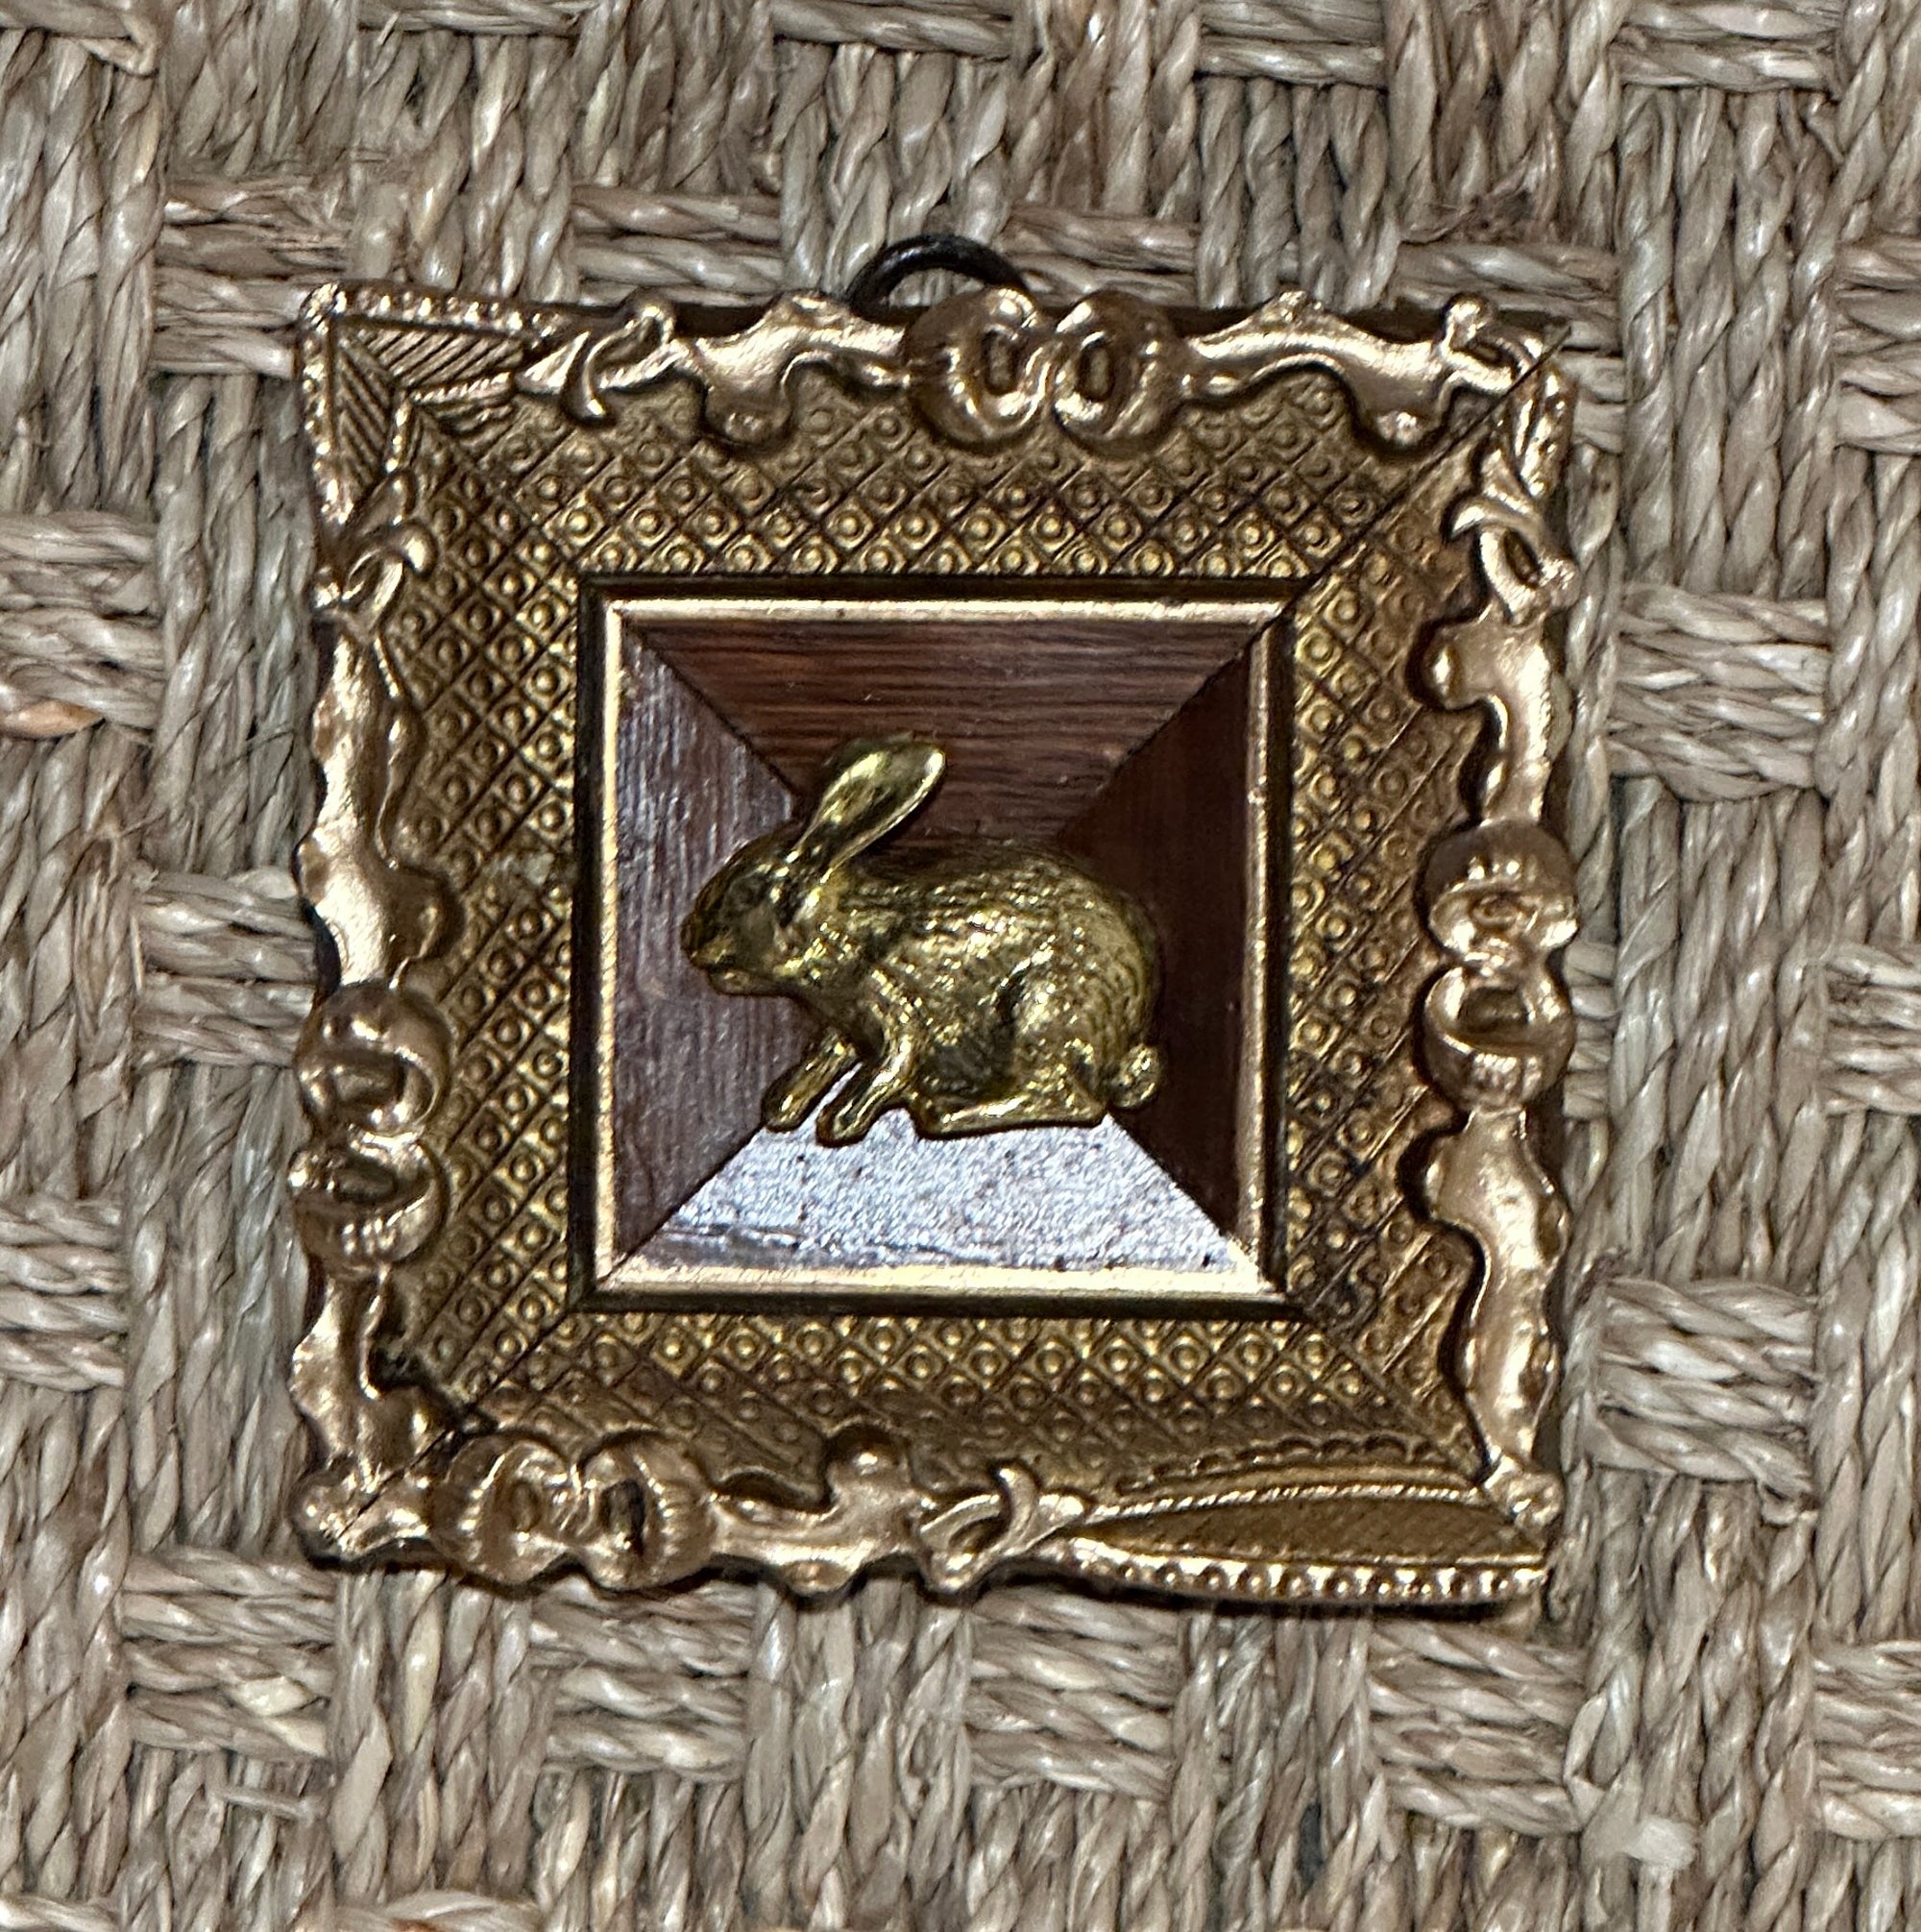 Museum Bee, Gilt Frame with Bunny